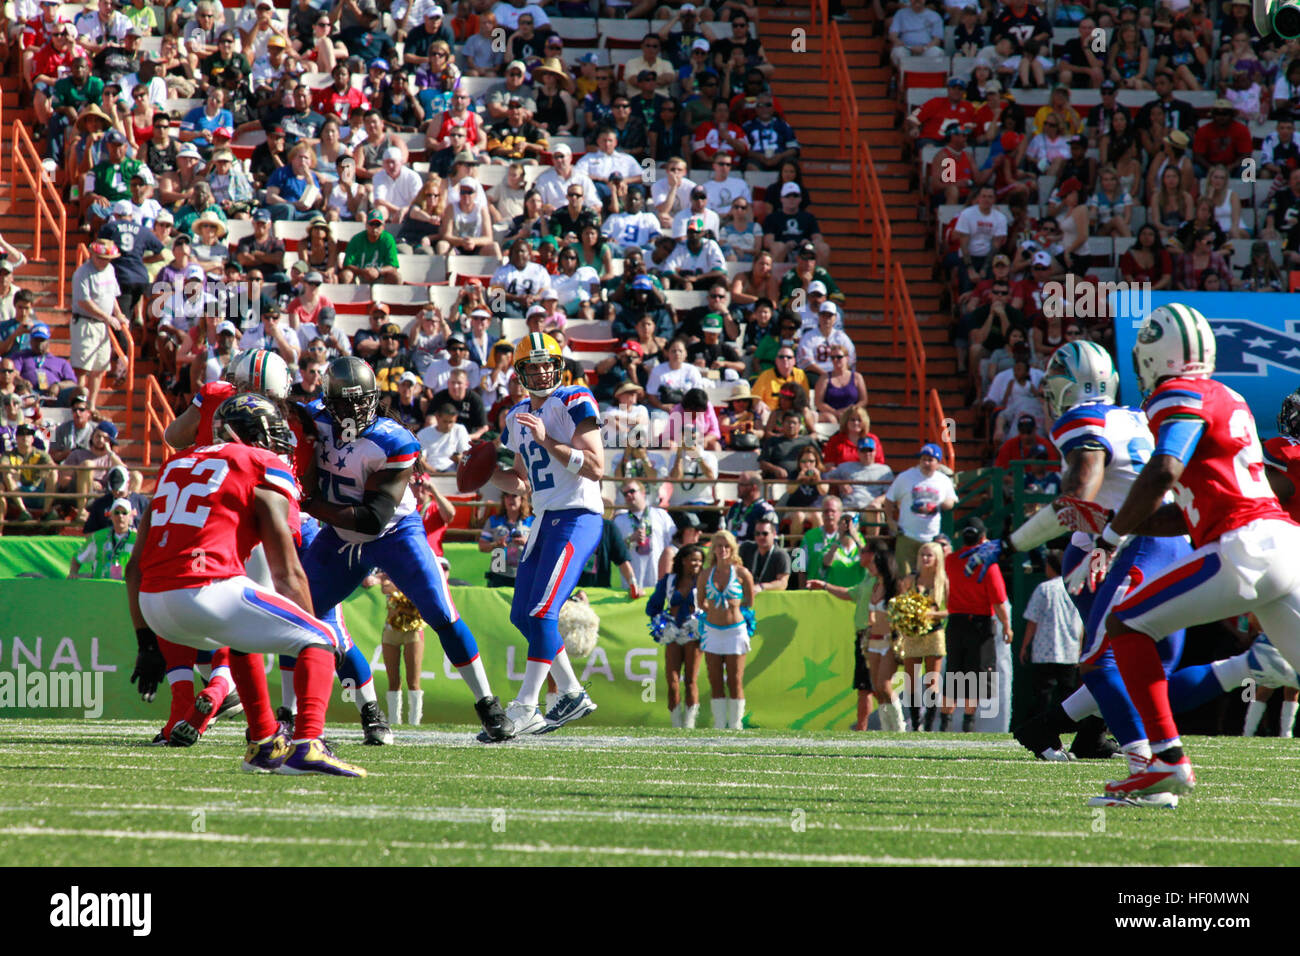 Green Bay Packers quarterback Aaron Rodgers searches for an open receiver at the Aloha Stadium during National Football League's 2012 Pro Bowl game in Honolulu, Hawaii, Jan. 29, 2012. Pro Bowl 2012 120129-M-DX861-087 Stock Photo